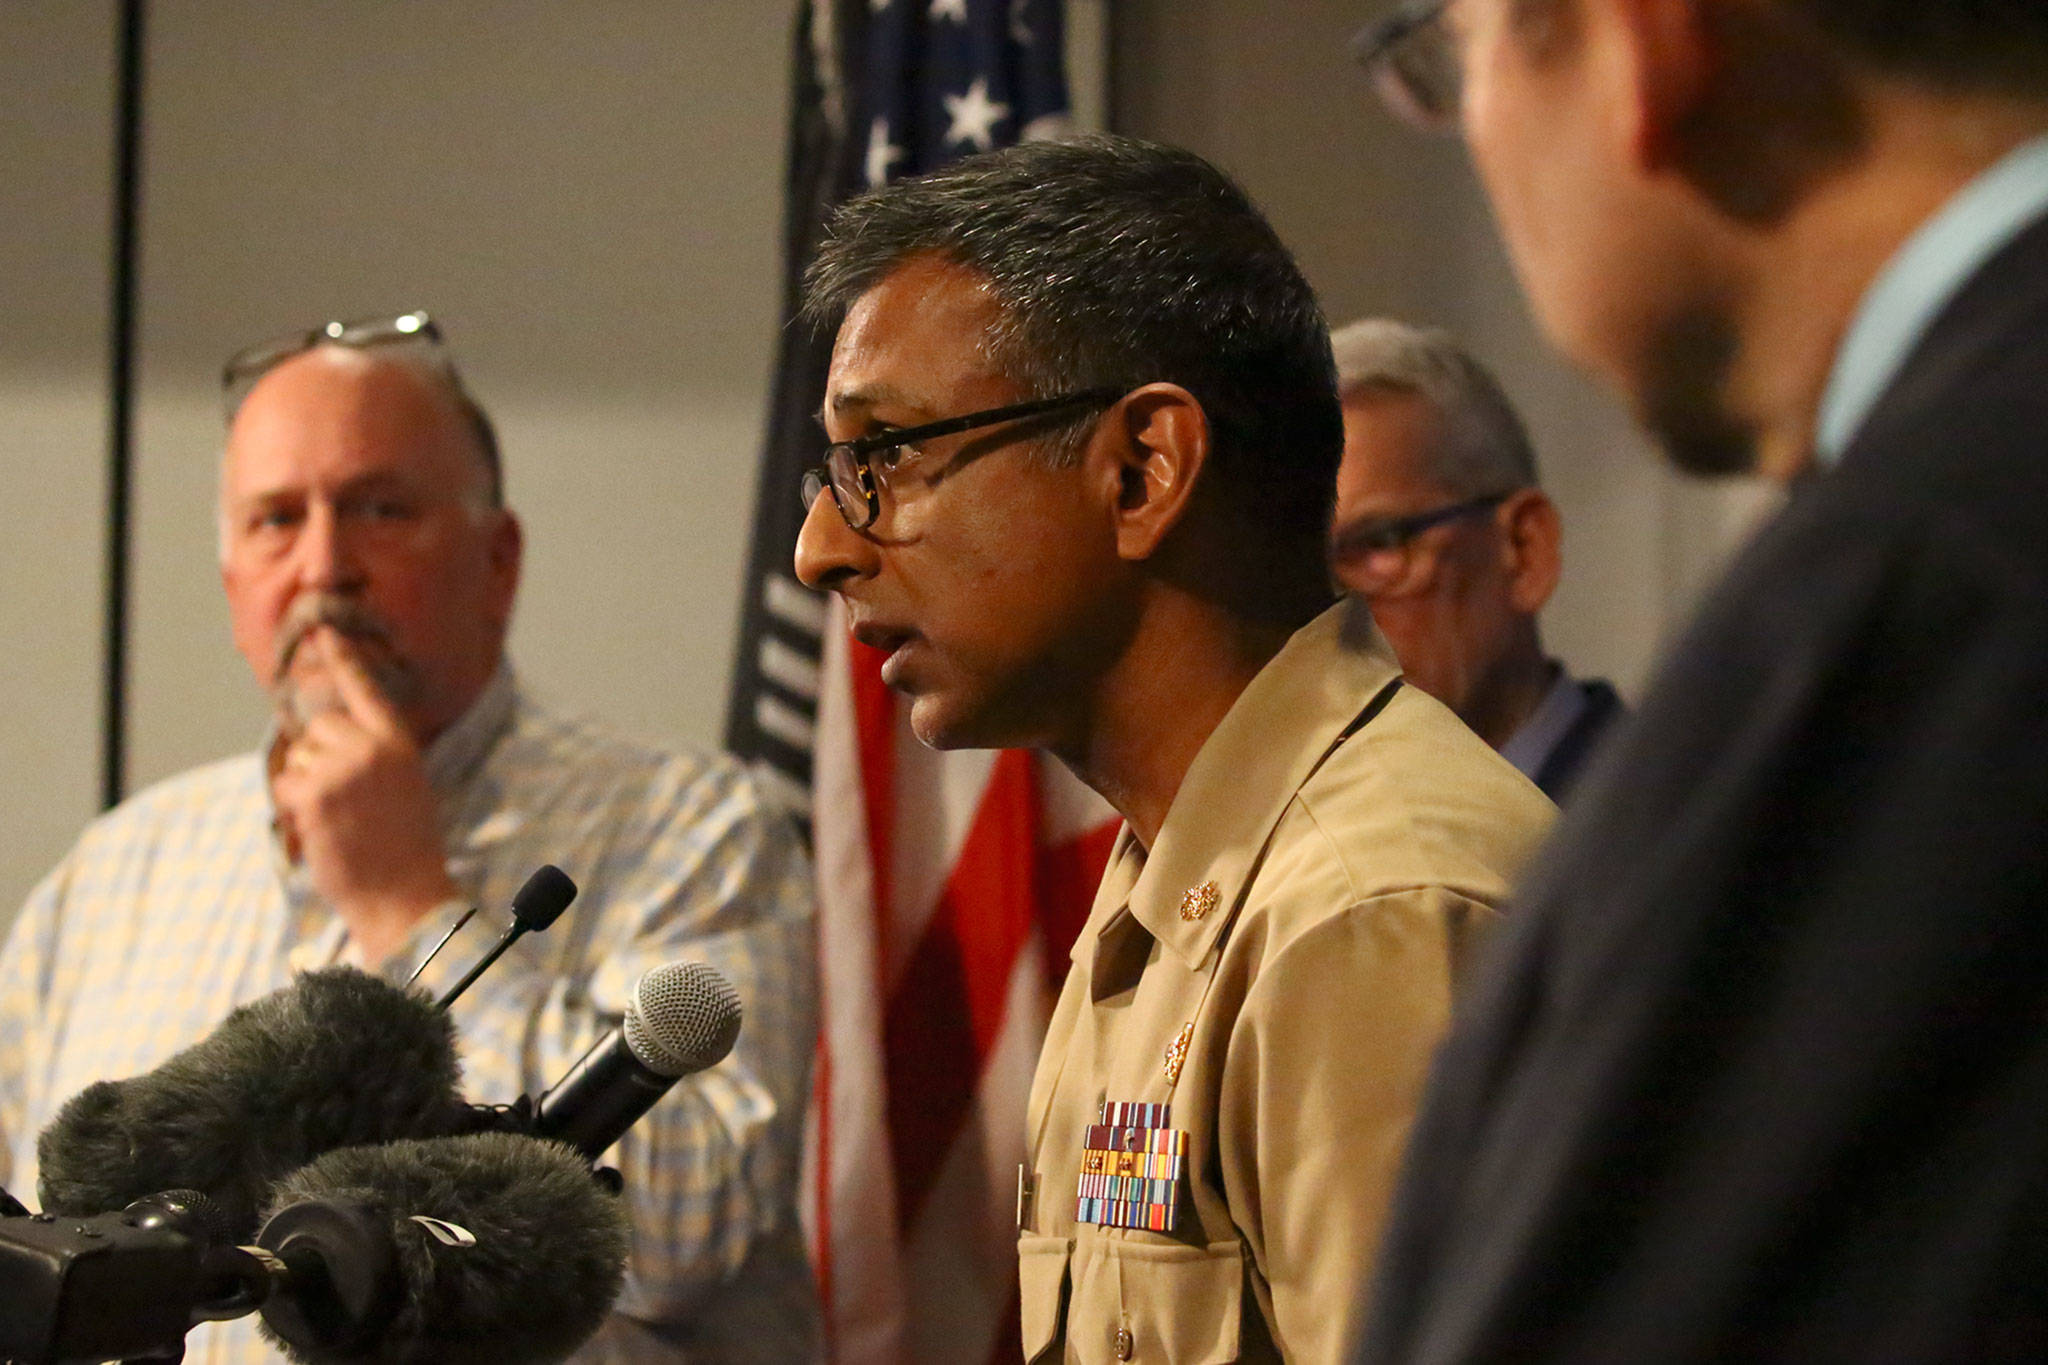 Dr. Satish Pillai, of the Division of Preparedness and Emerging Infections at the Centers for federal Disease Control and Prevention, fields questions during a news conference Tuesday afternoon at the state Public Health Laboratories in Shoreline. (Kevin Clark / The Herald)